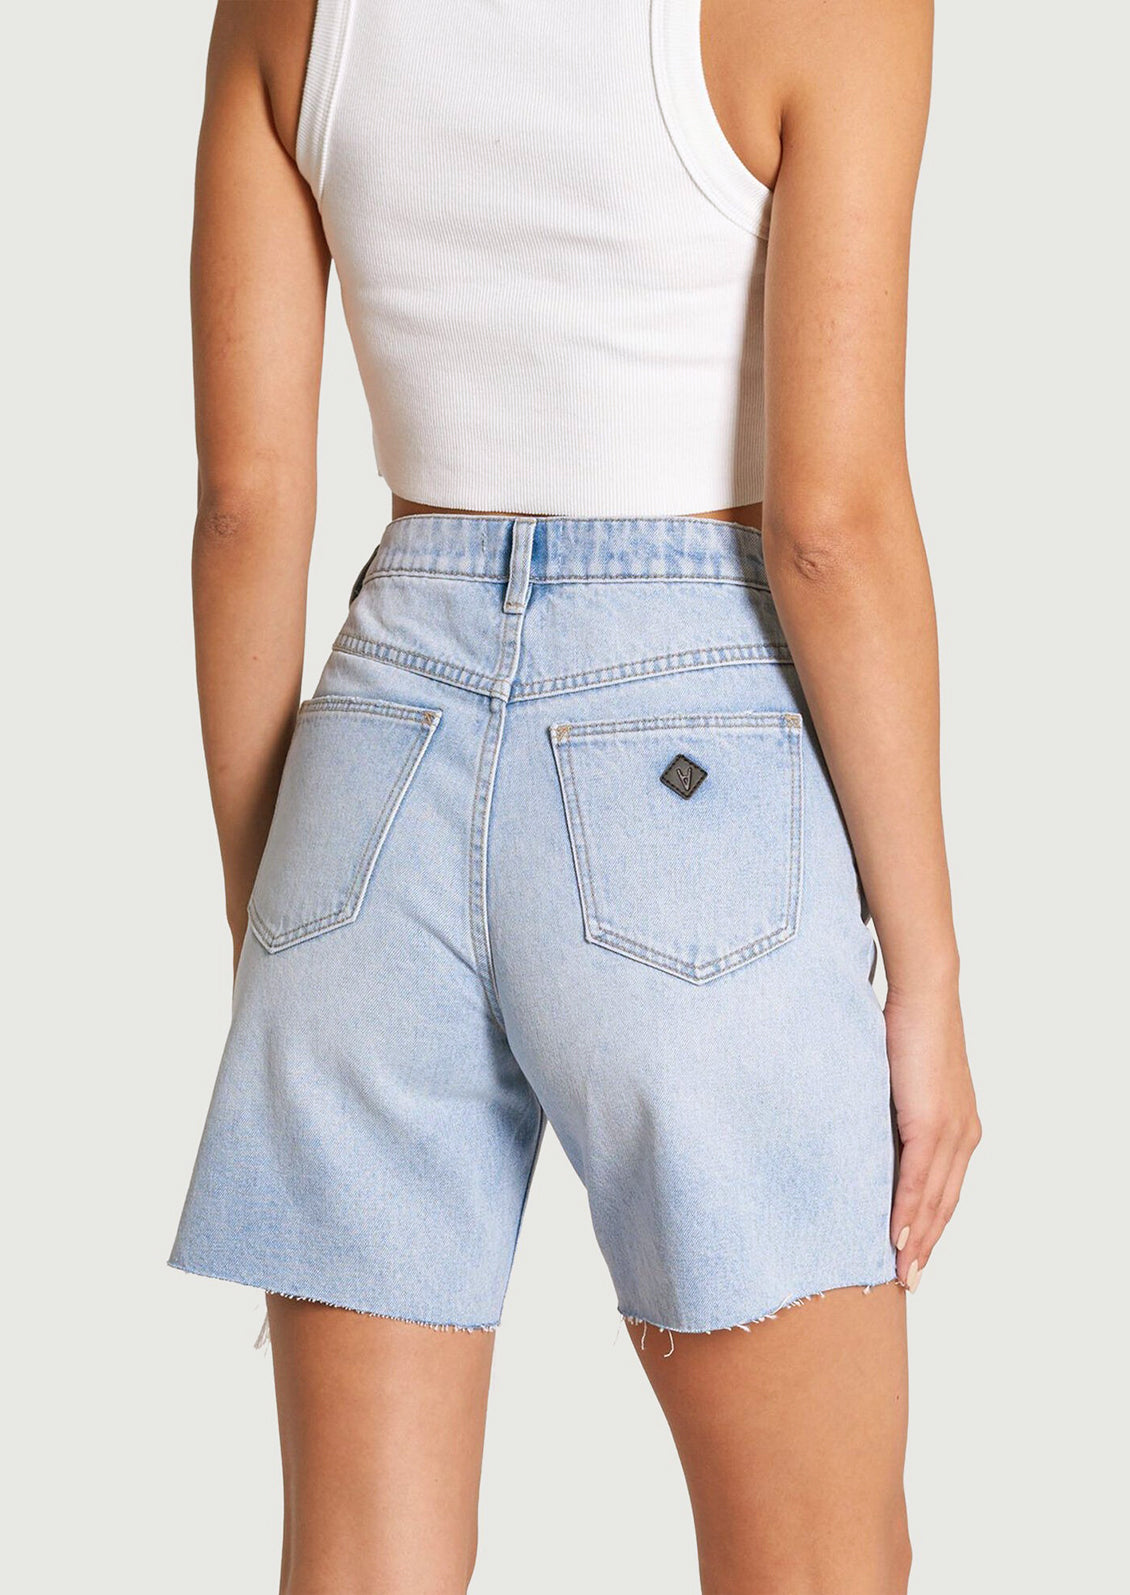 A pair of light blue denim shorts with mid-length and distressed detailing at hemline.